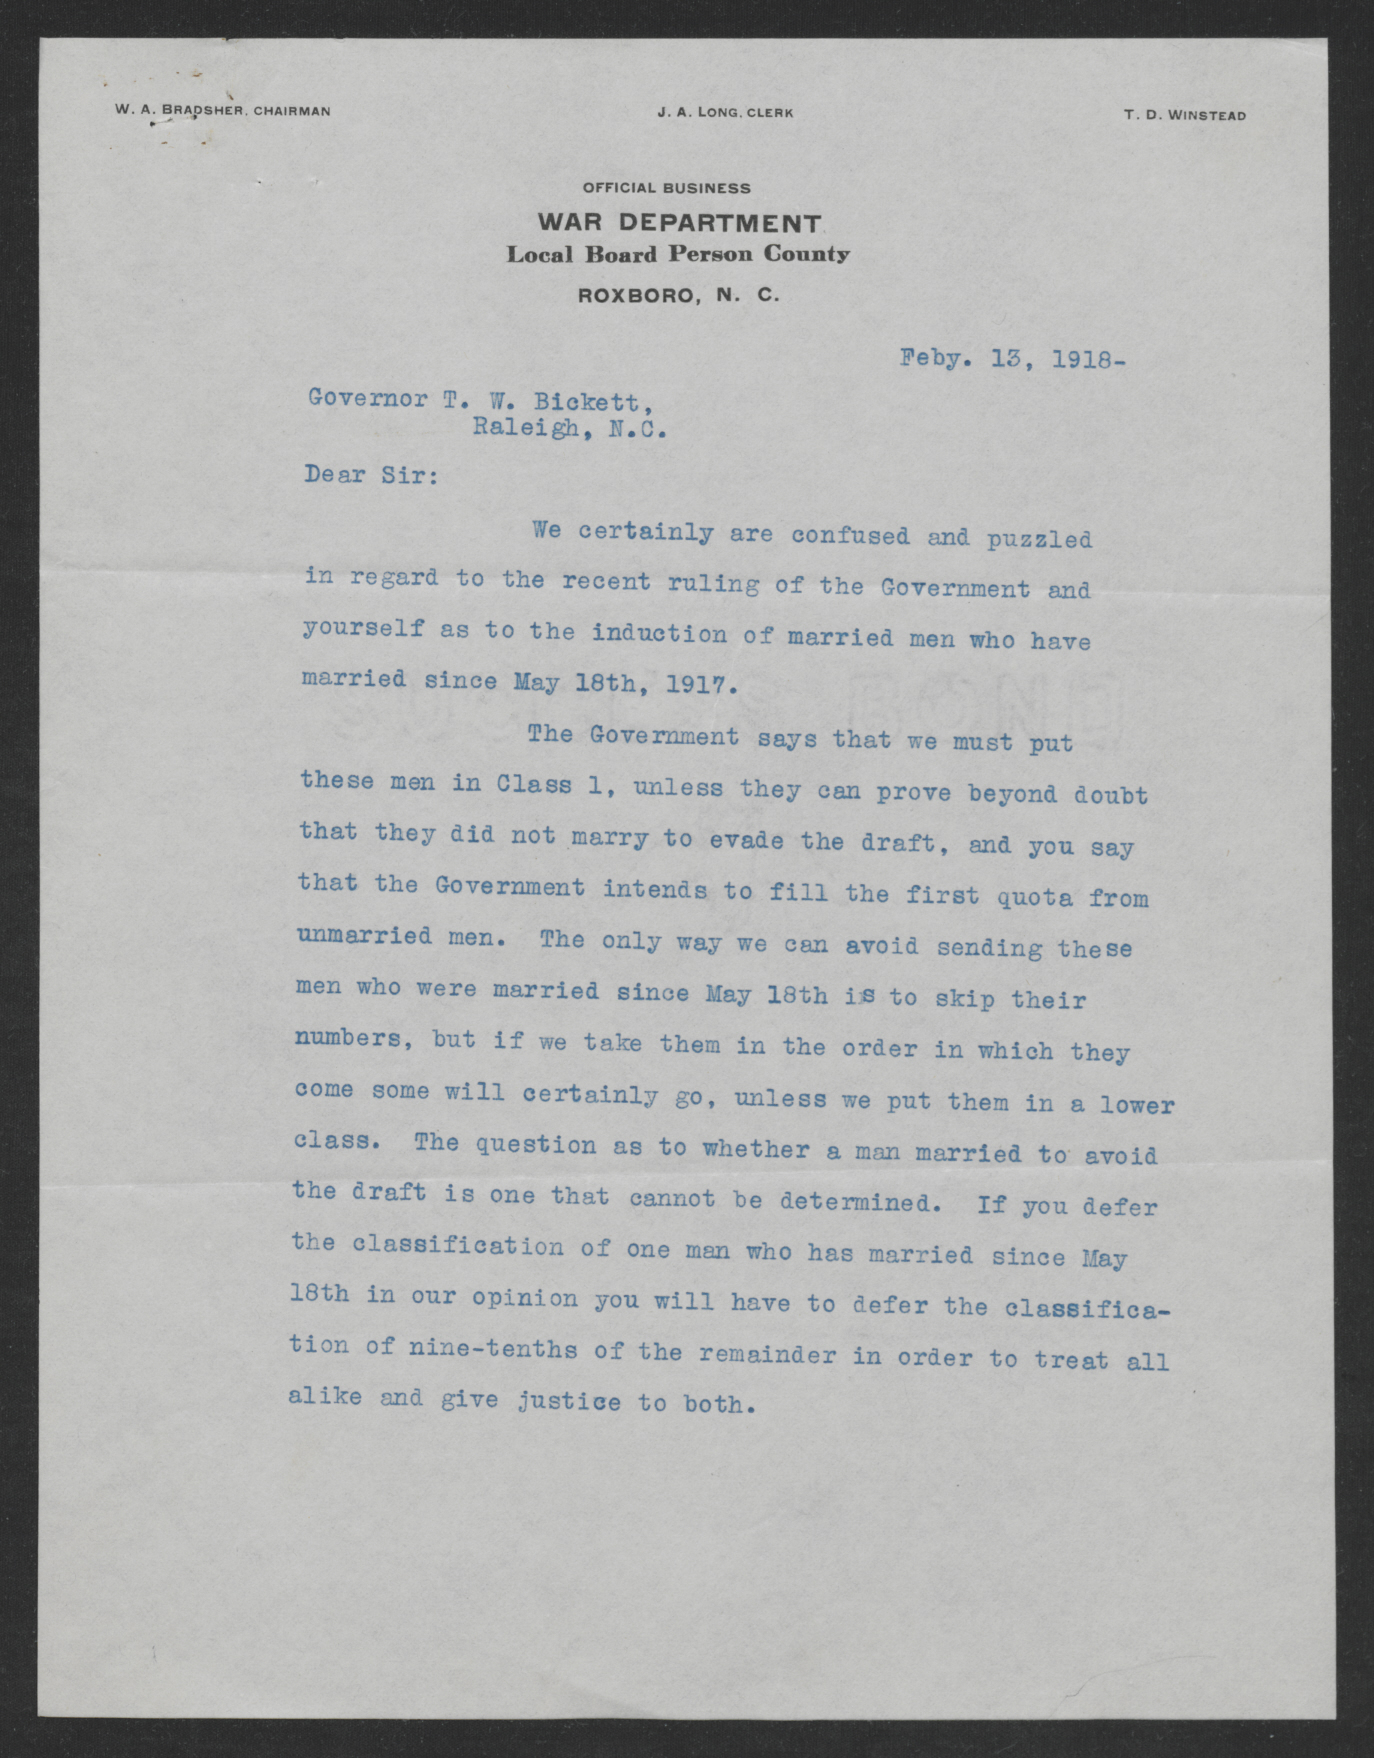 Letter from James A. Long to Thomas W. Bickett, February 13, 1918, page 1